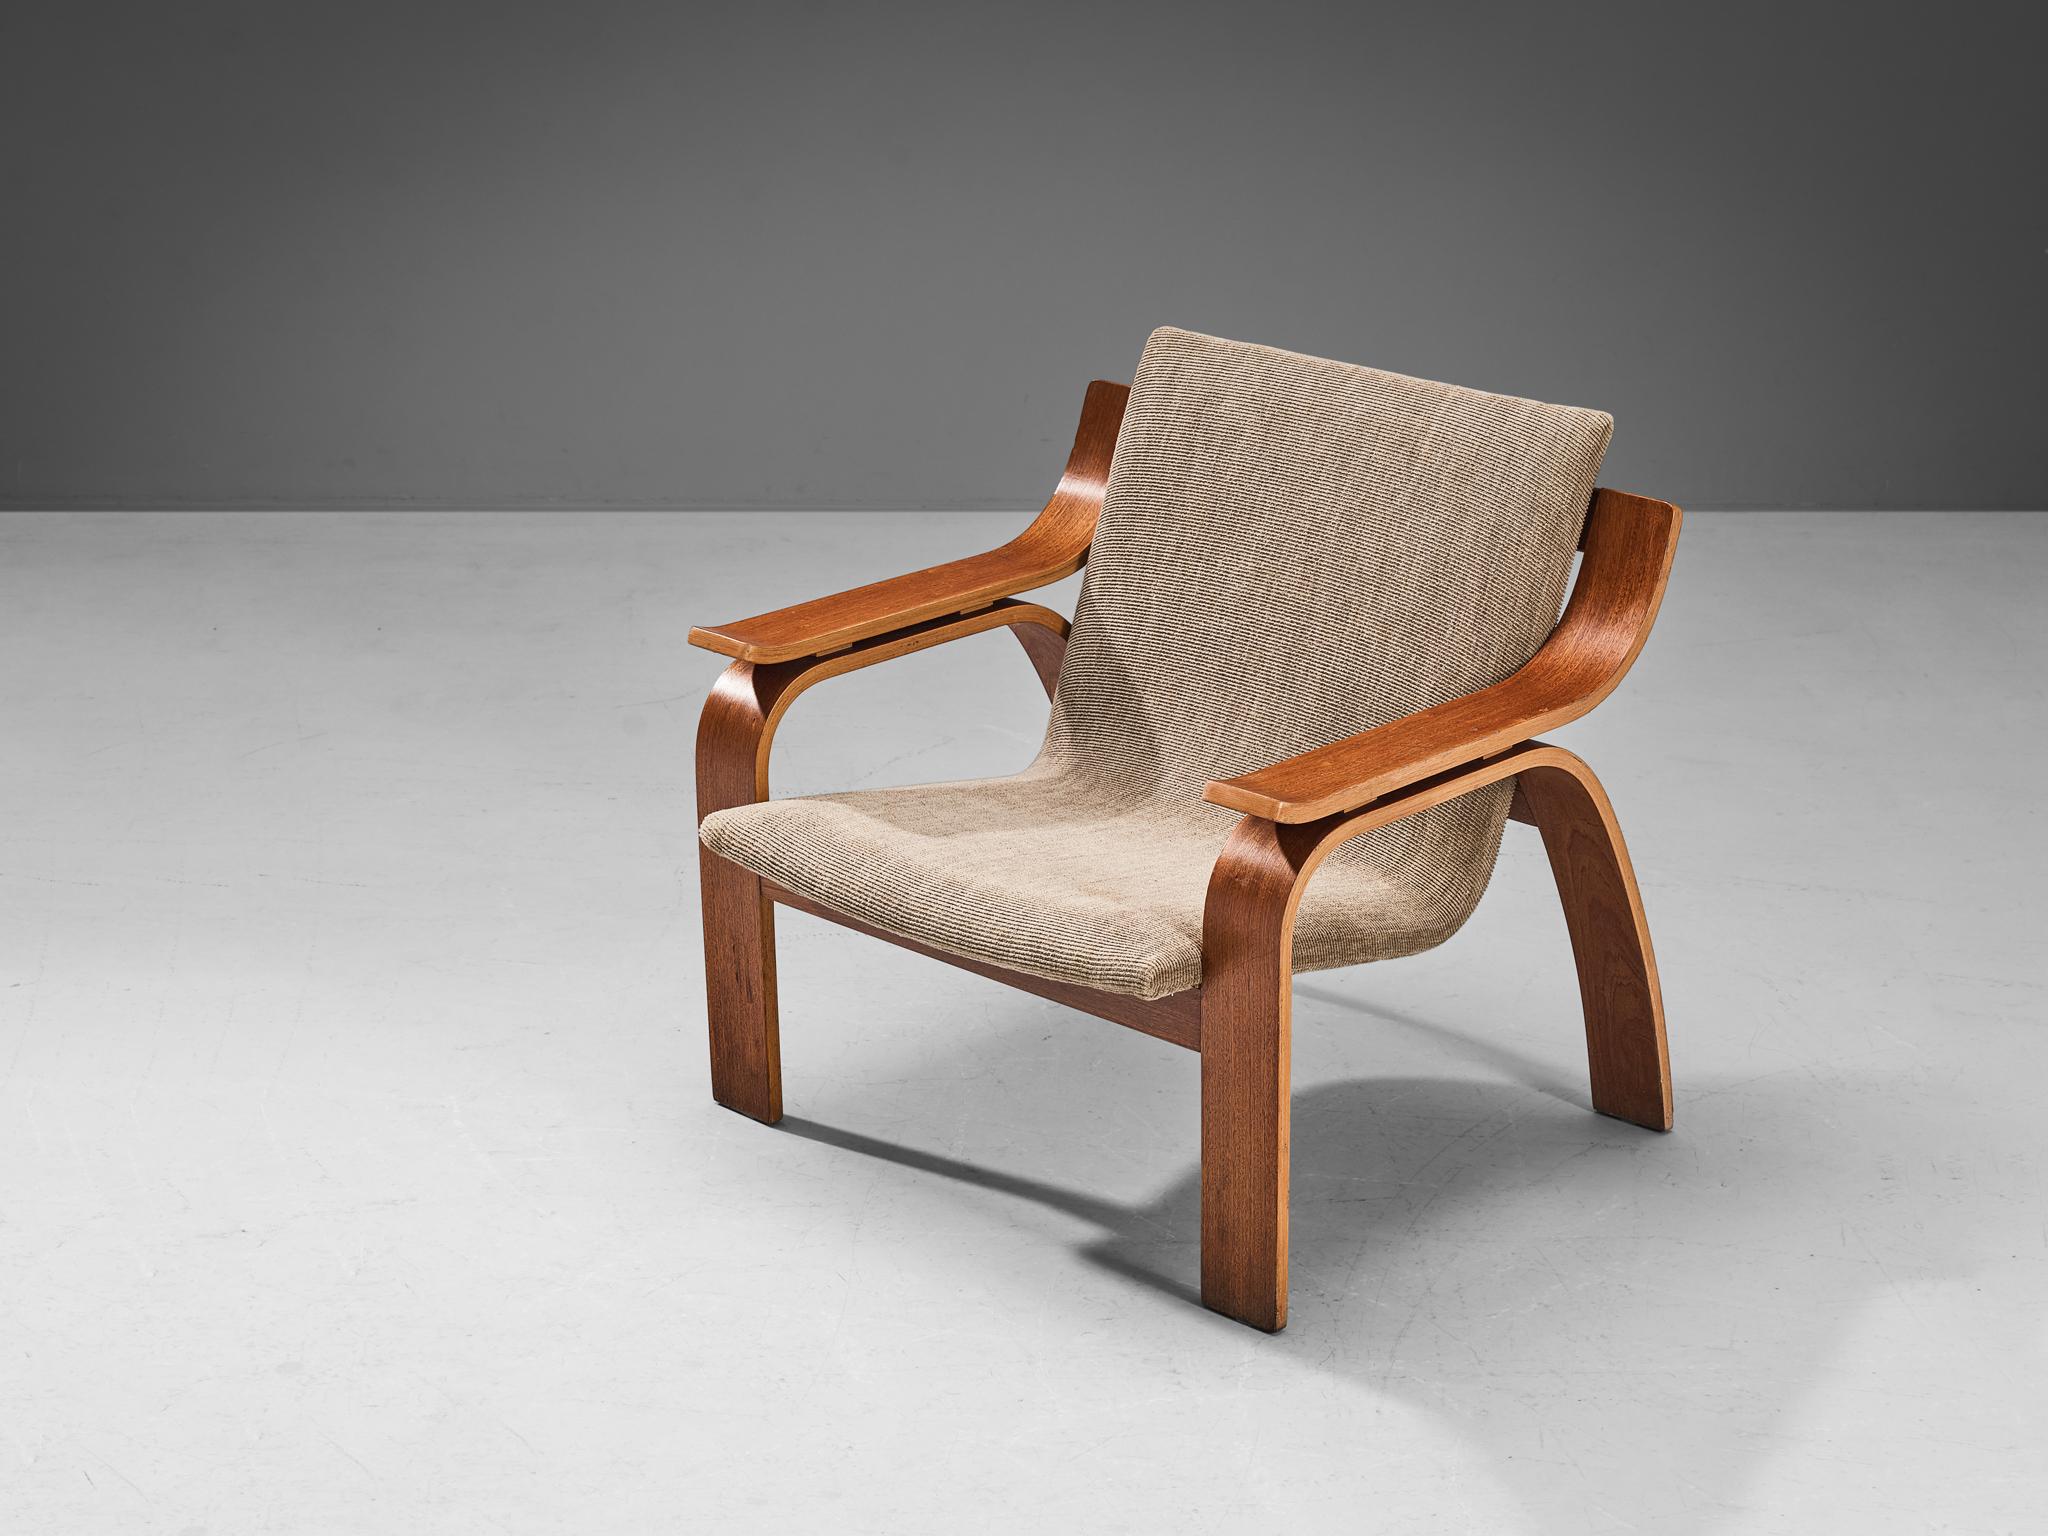 Bentwood Pair of Lounge Chairs in Mahogany and Sand Upholstery 1